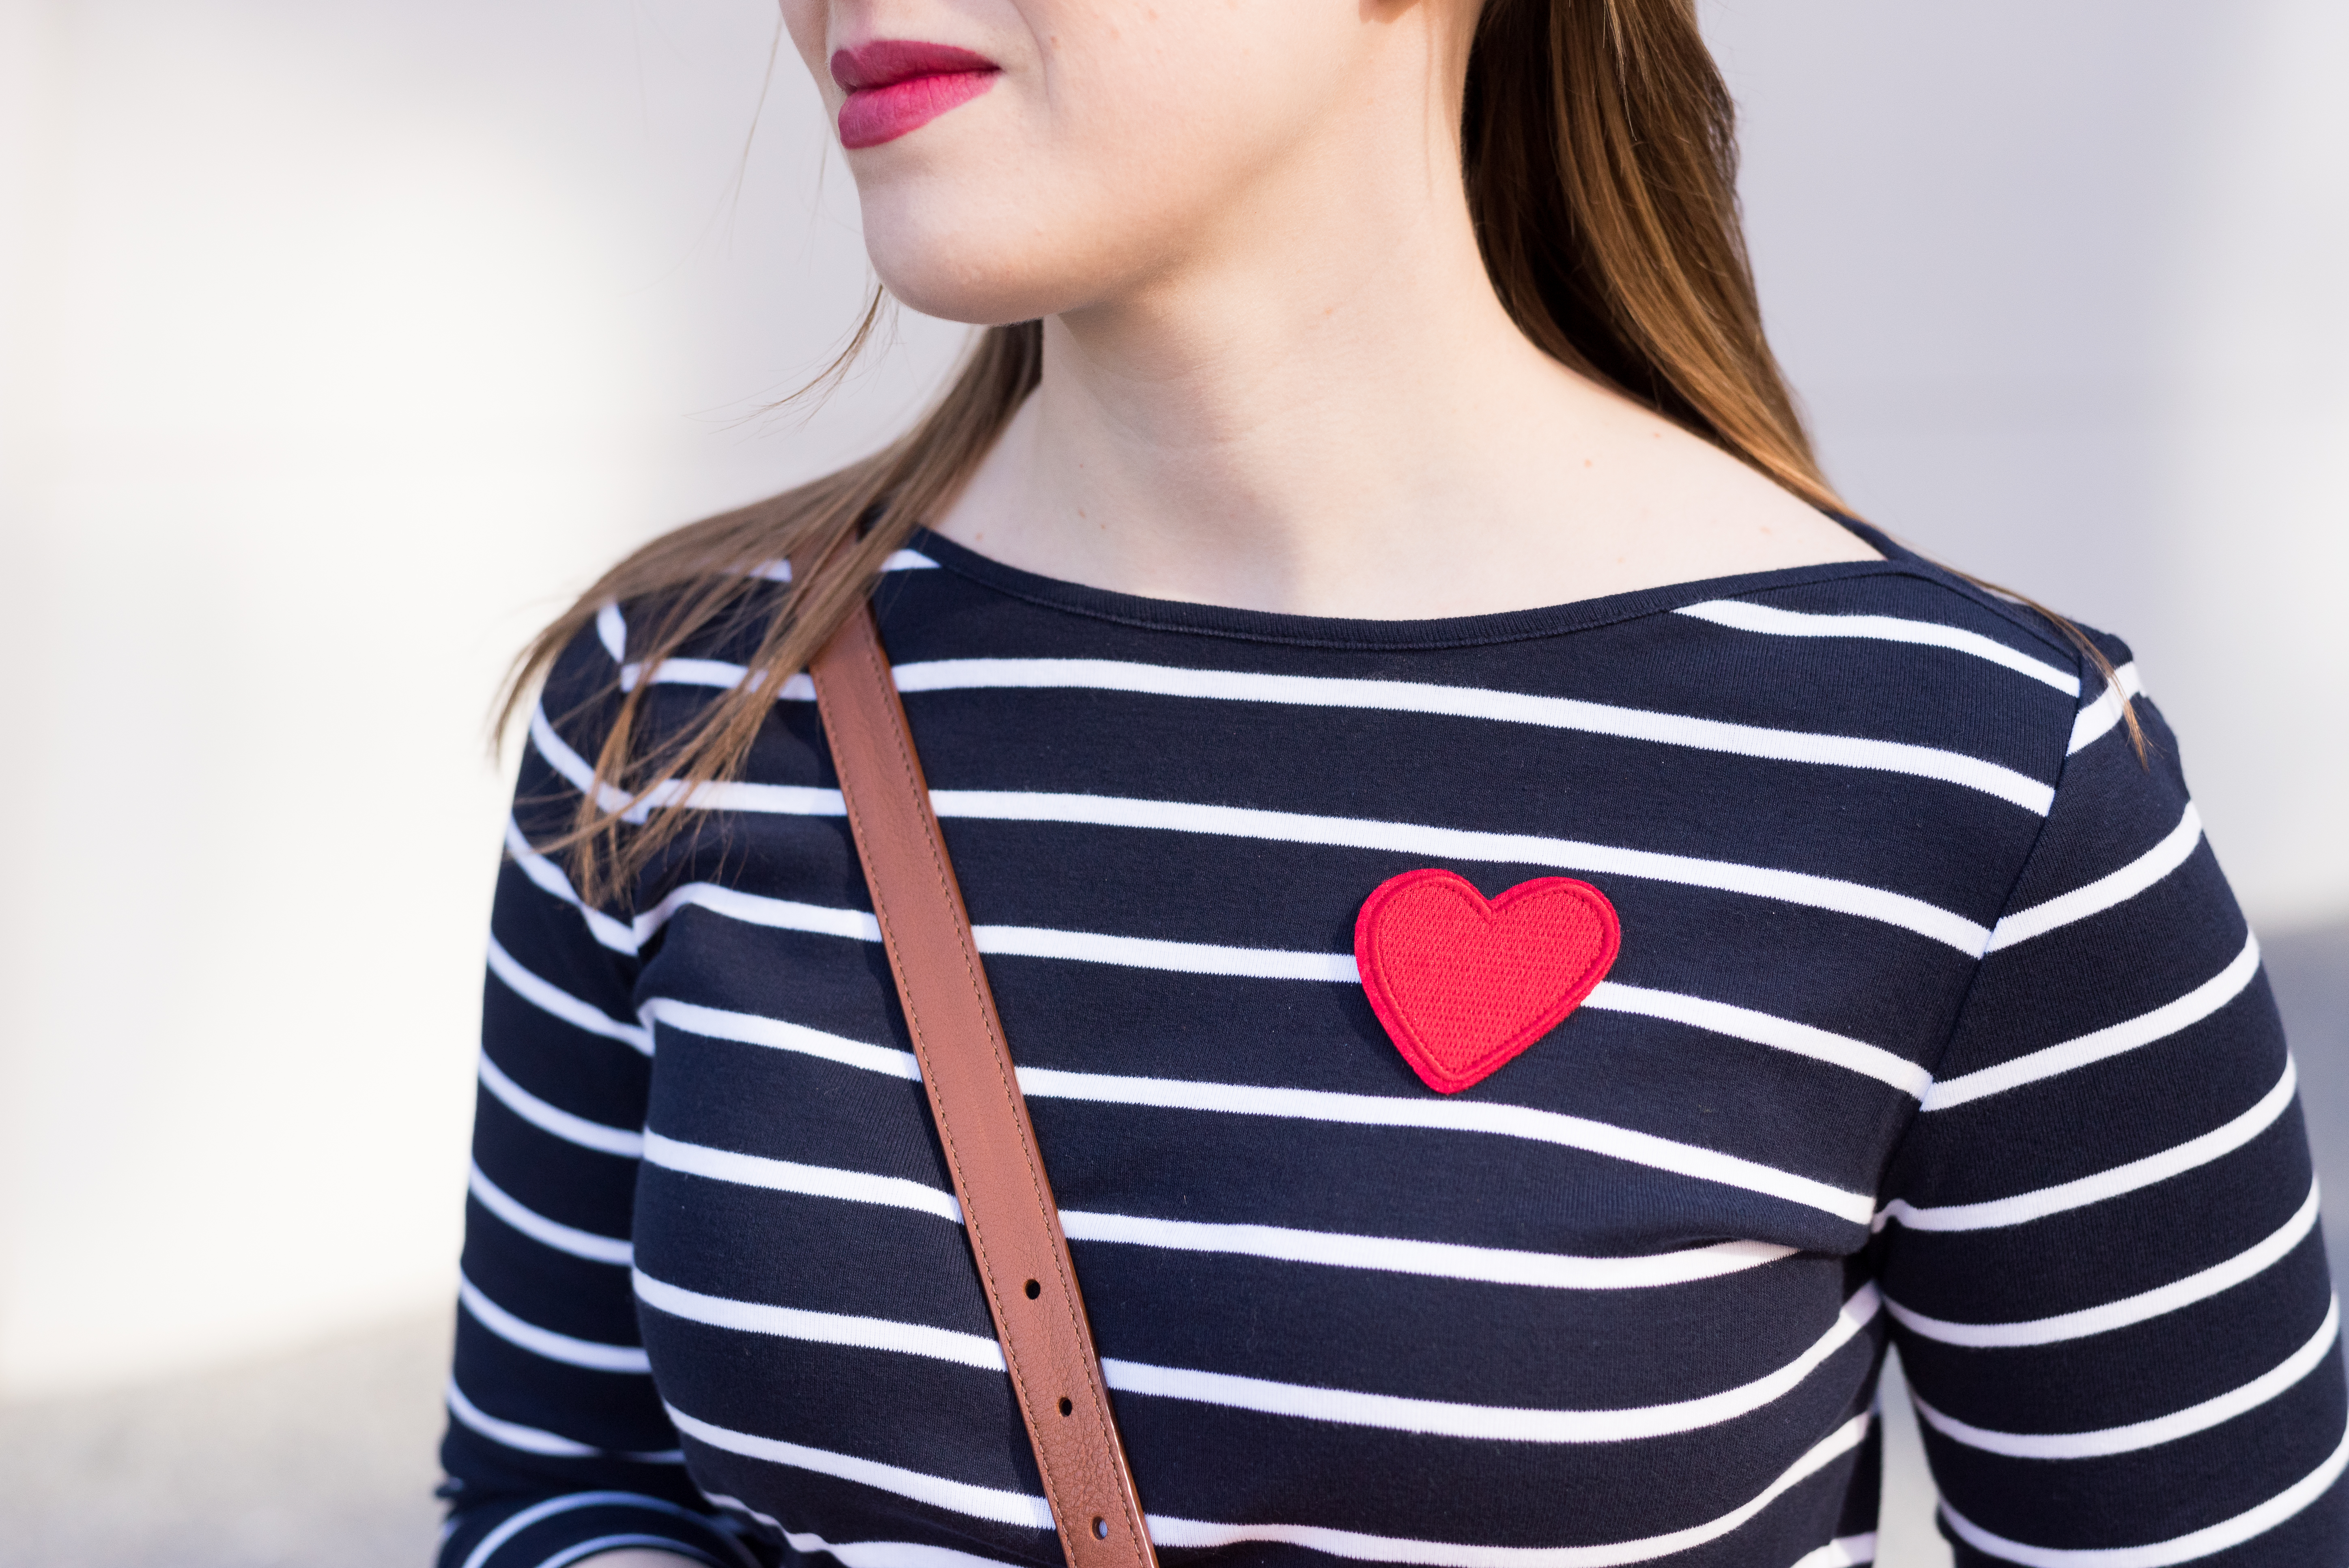 Cute Valentine's Day Tops That You Can Also Style For Work | Something Good, @danaerinw , 